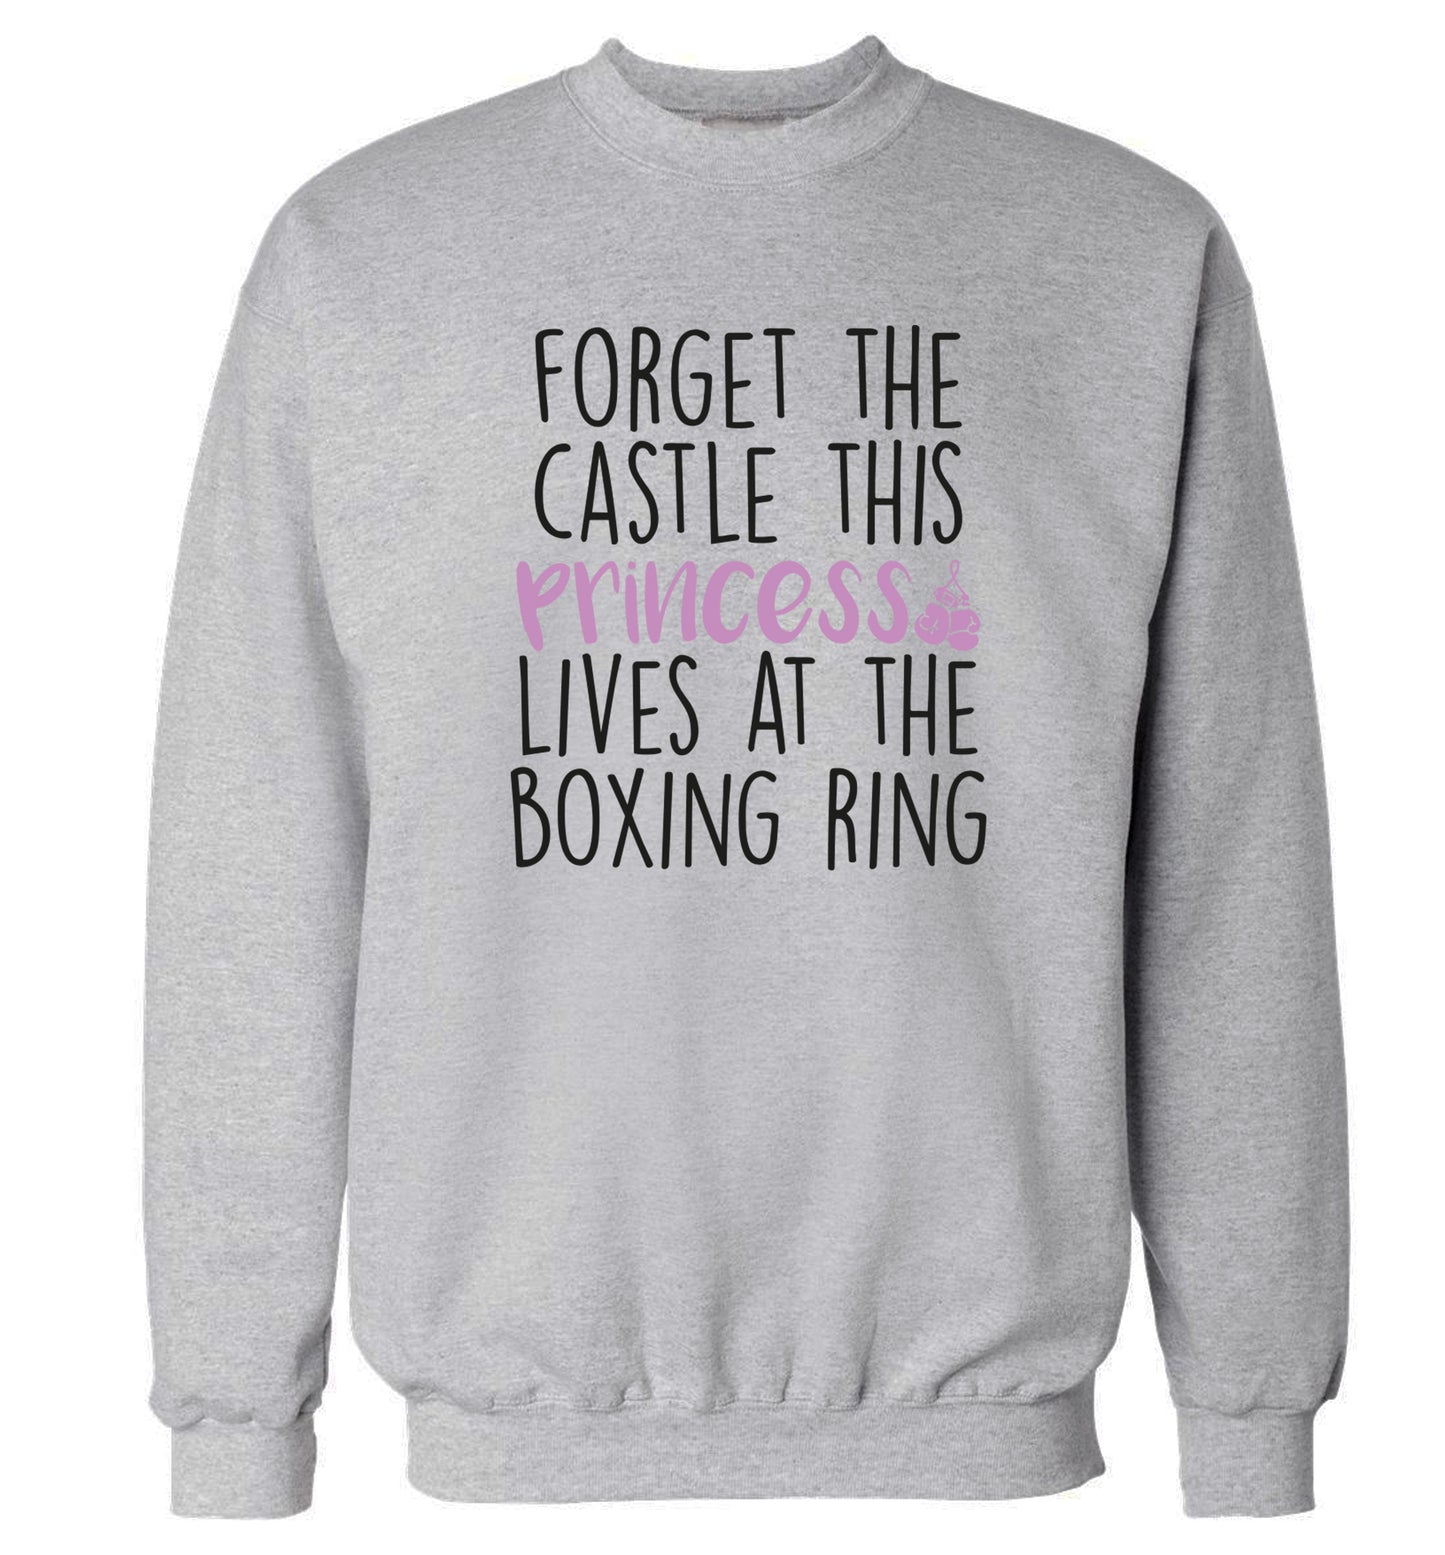 Forget the castle this princess lives at the boxing ring Adult's unisex grey Sweater 2XL